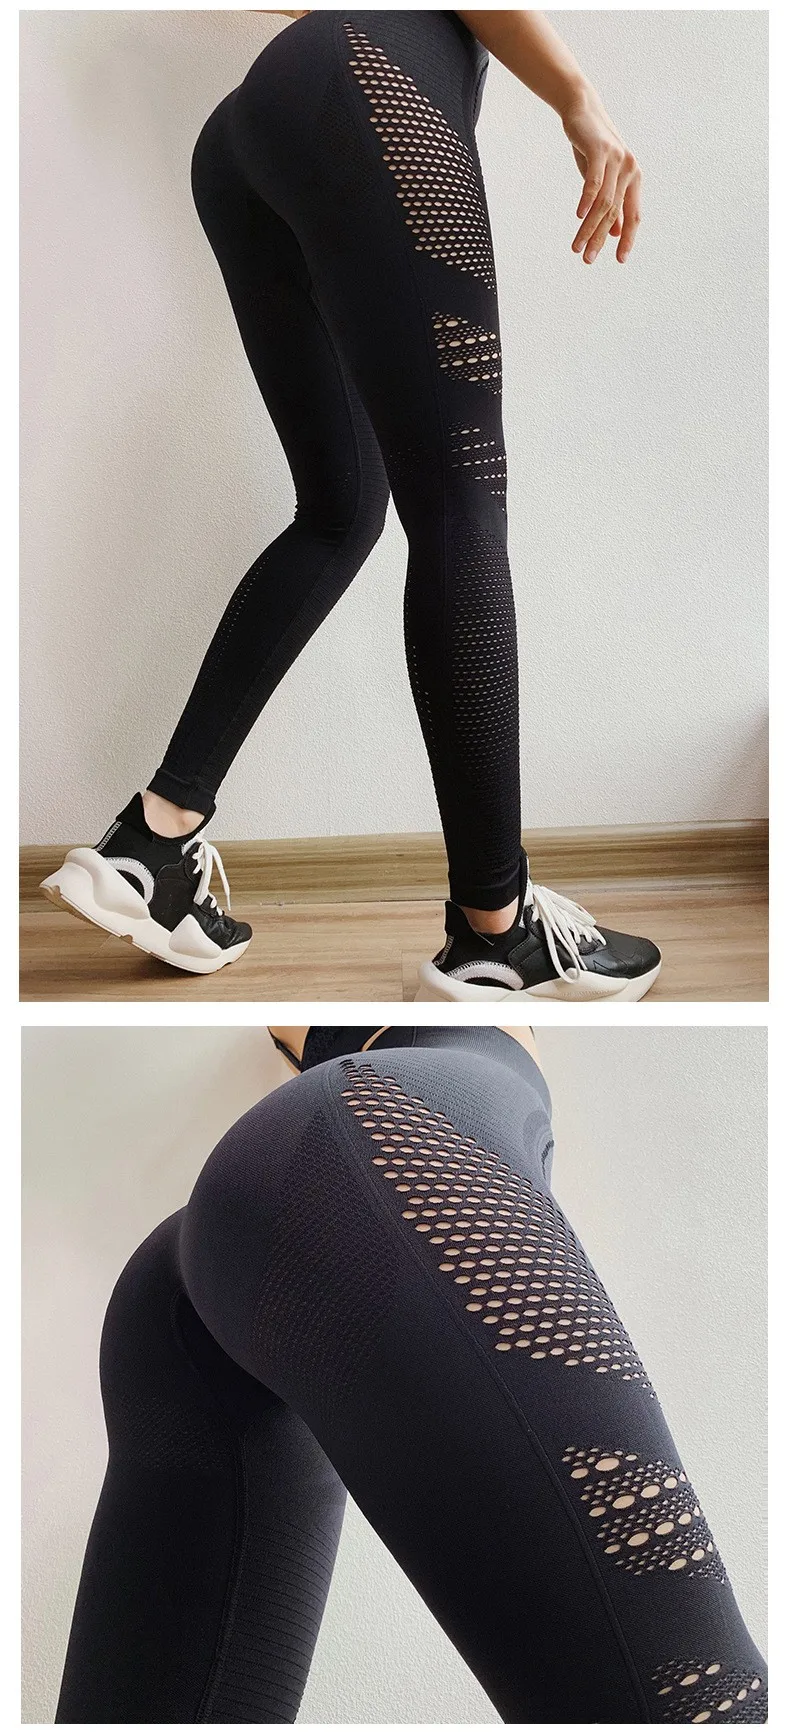 K204 Women Hollow Out Booty Sexy Slim Fitness Seamless Workout Pants Butt Lifting Yoga Gym